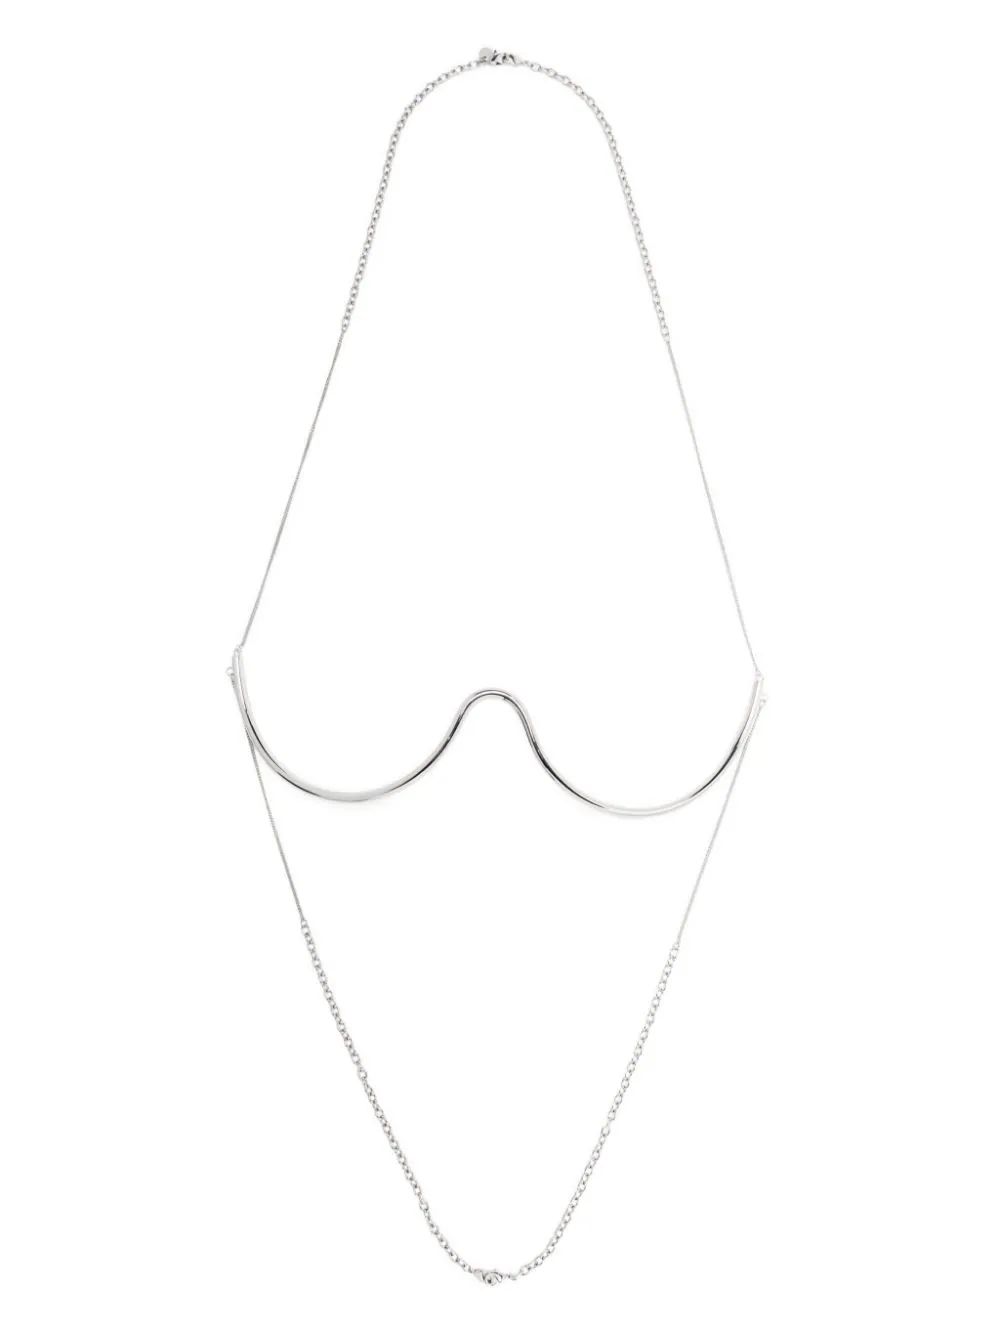 Cult GaiaAsha bra-cup chain necklace$298Import duties included | Farfetch Global